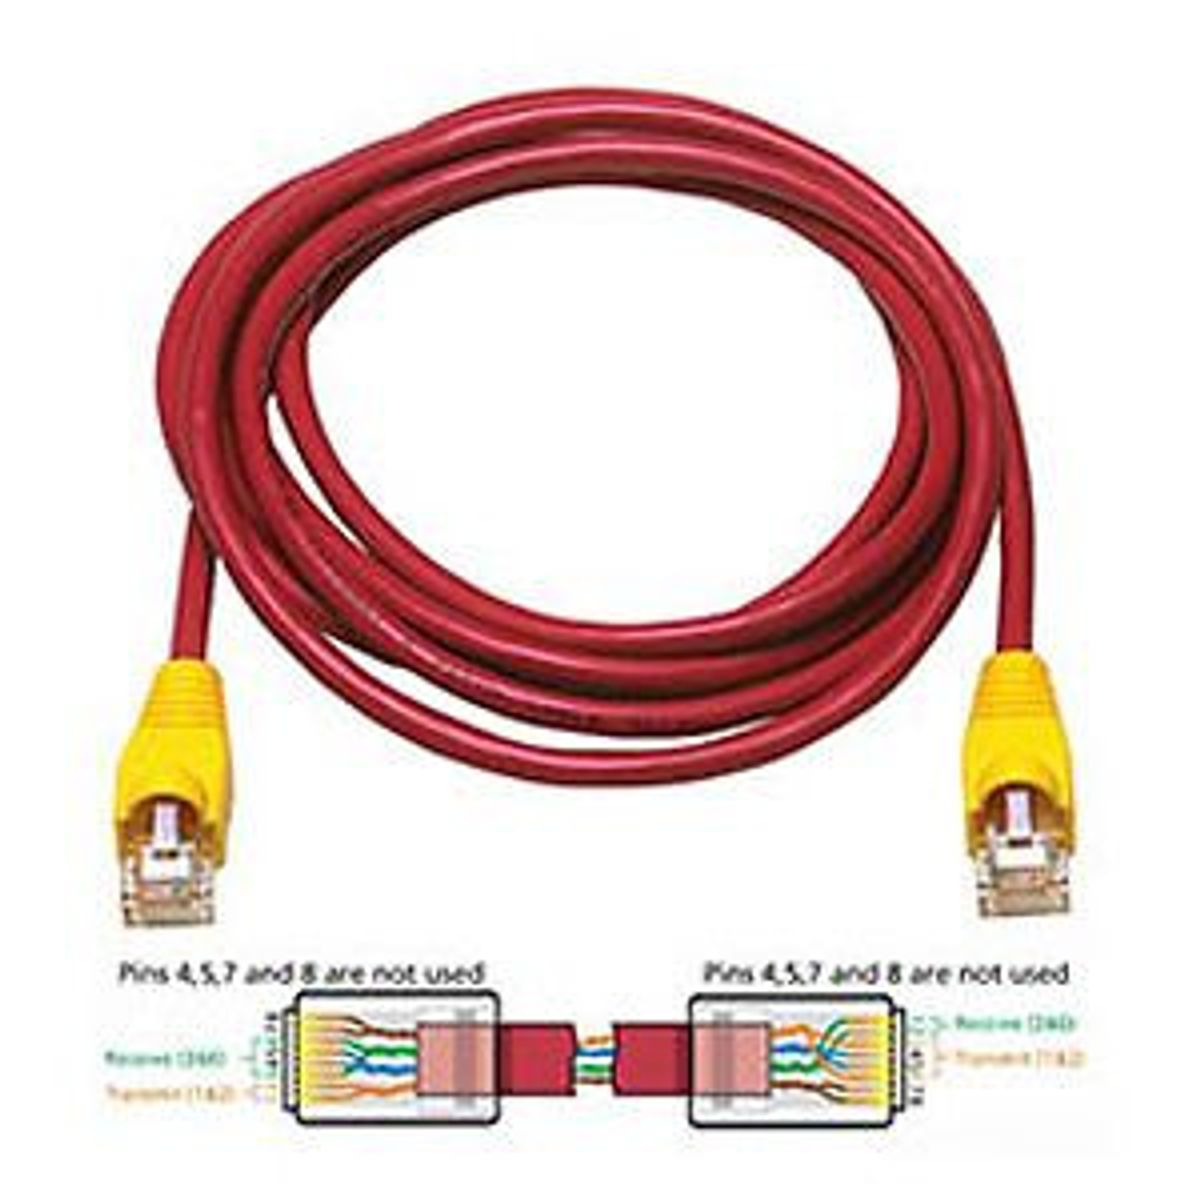 Cat 5e Crossover Cable, 5 ft. Allen Tel Products, Inc.